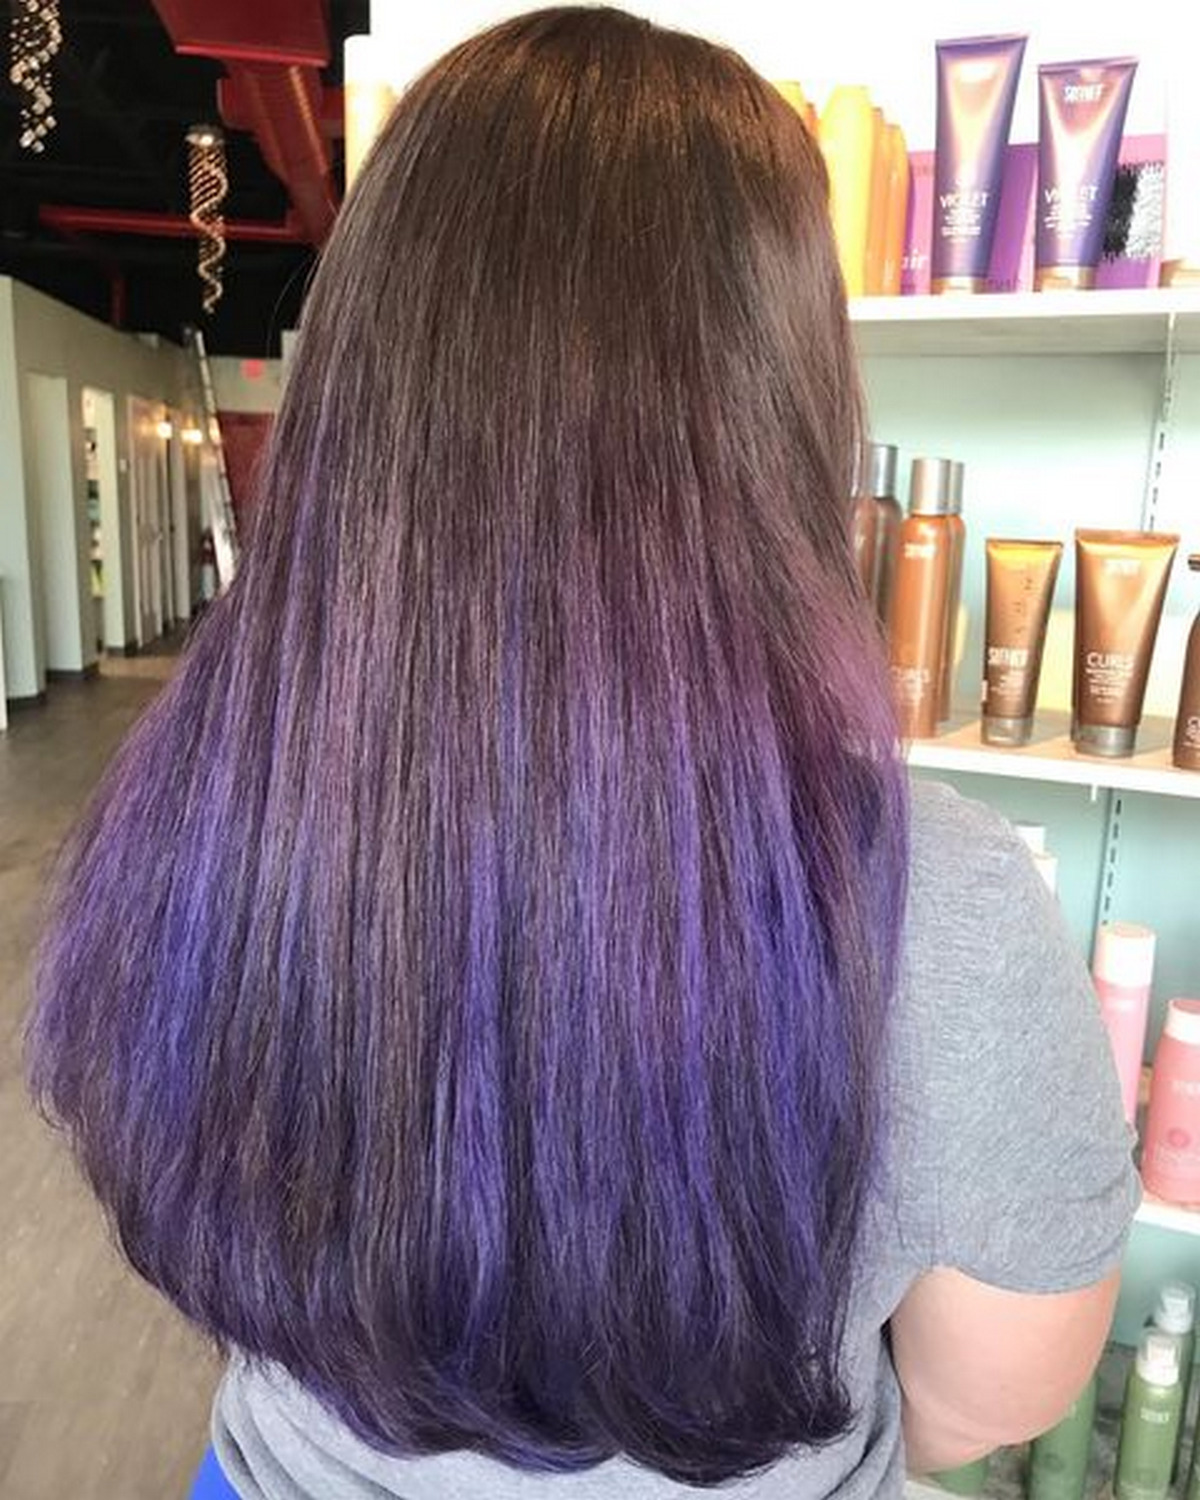 Brown Hair with Purple Highlights